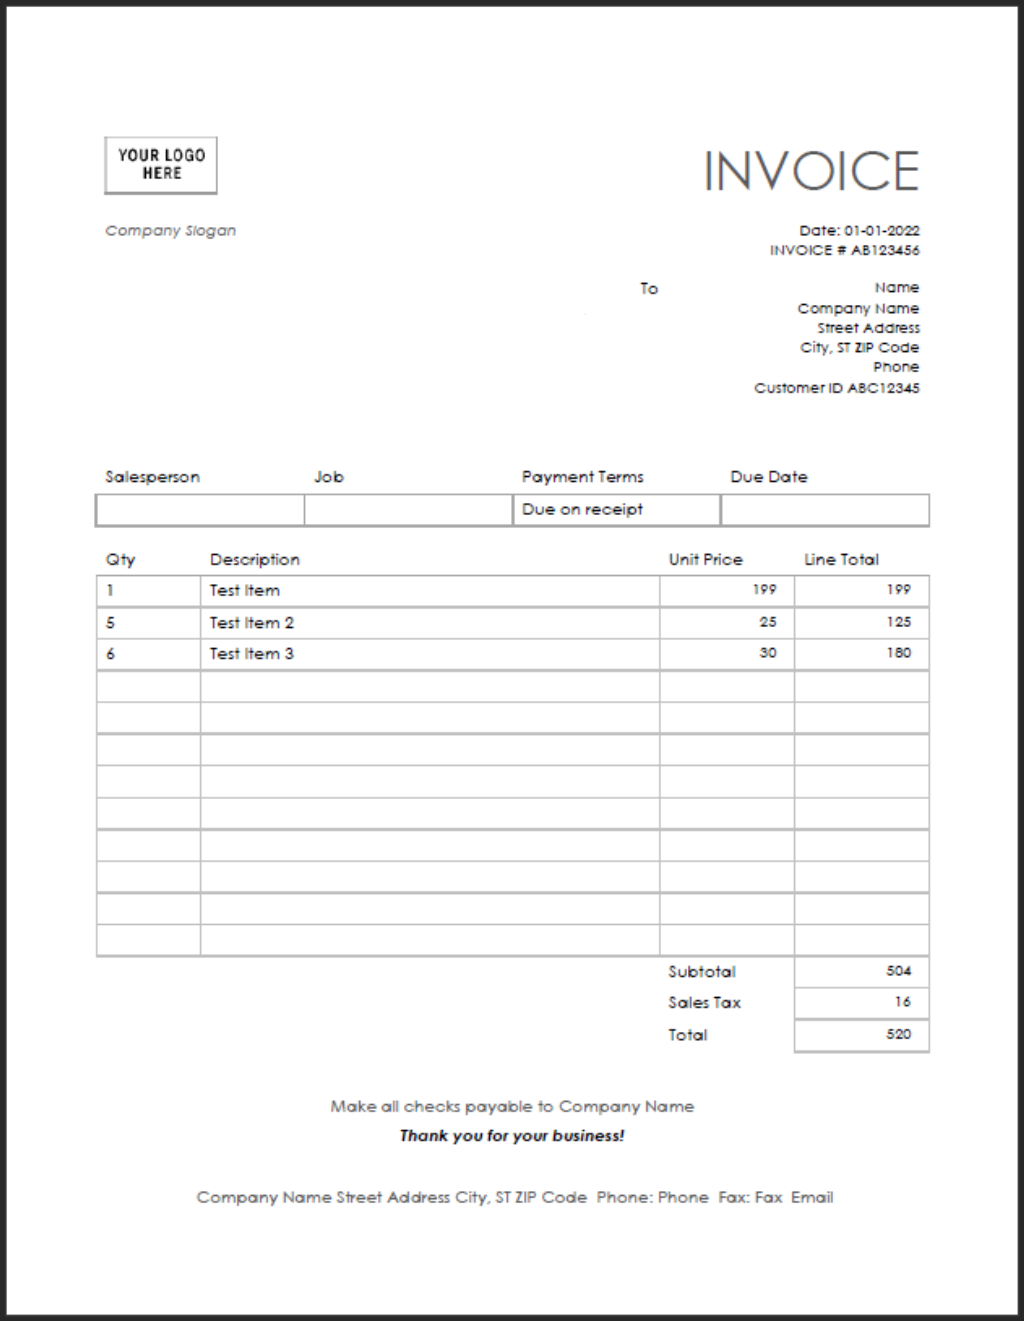 Sample invoice PDF for extracting text